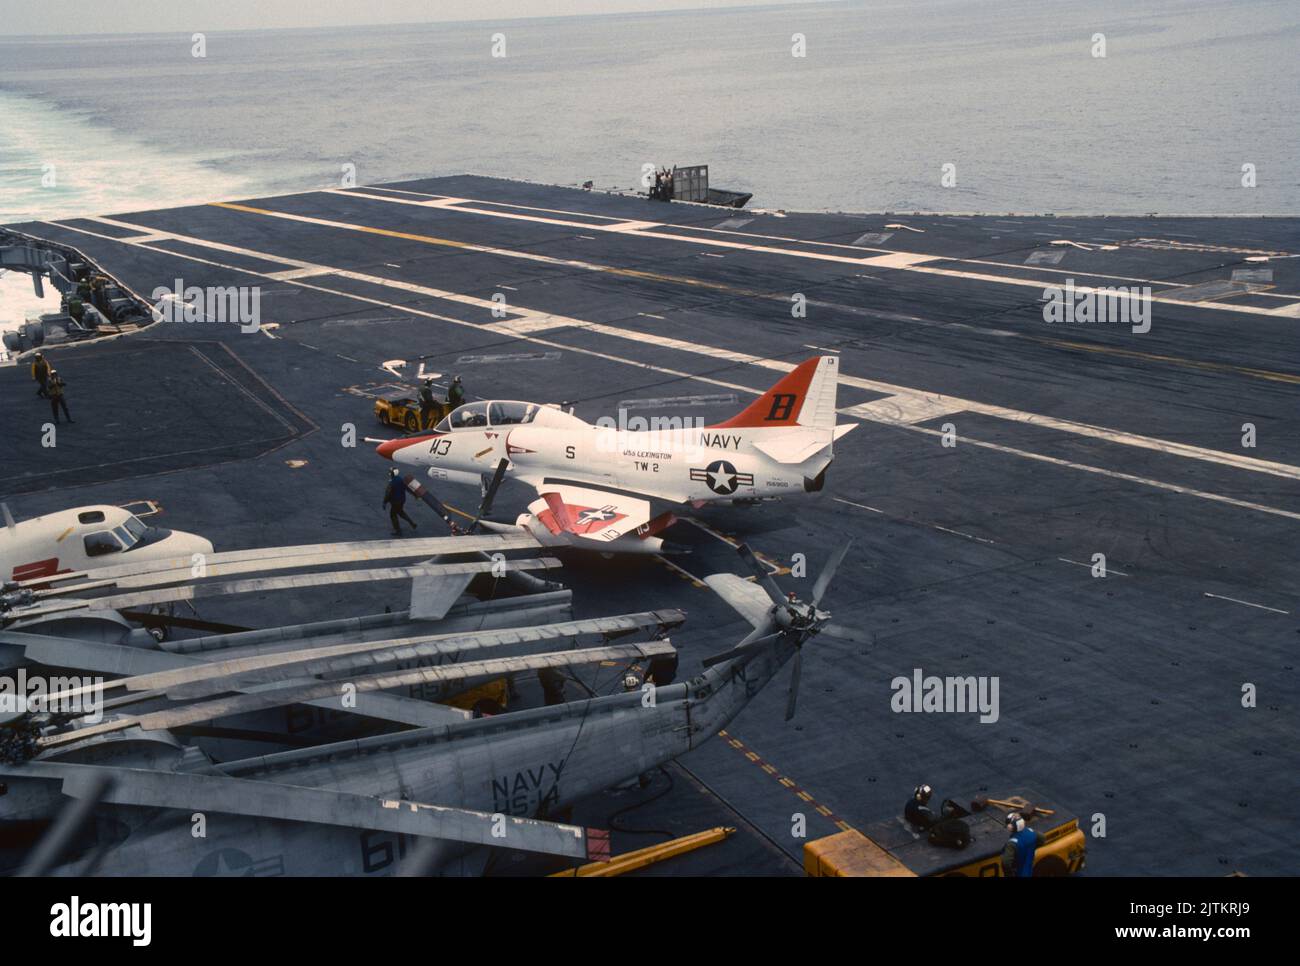 Douglas A-4 Skyhawk trainer aircraft on the deck during carrier quals at sea Stock Photo